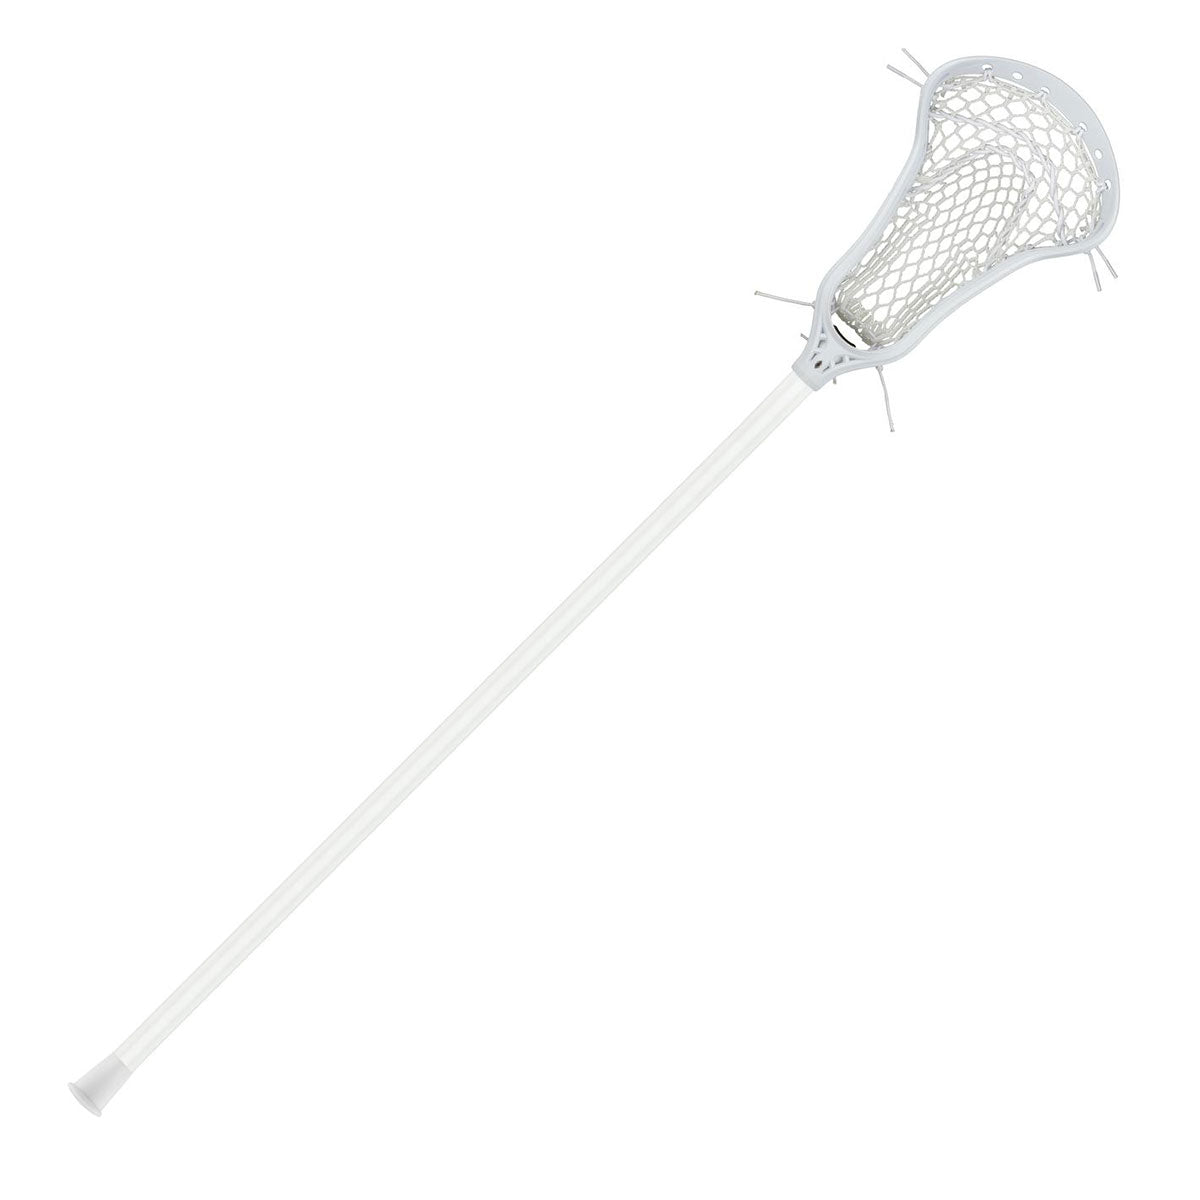 StringKing Complete 2 Pro OFFENSE Women's Lacrosse Stick full view